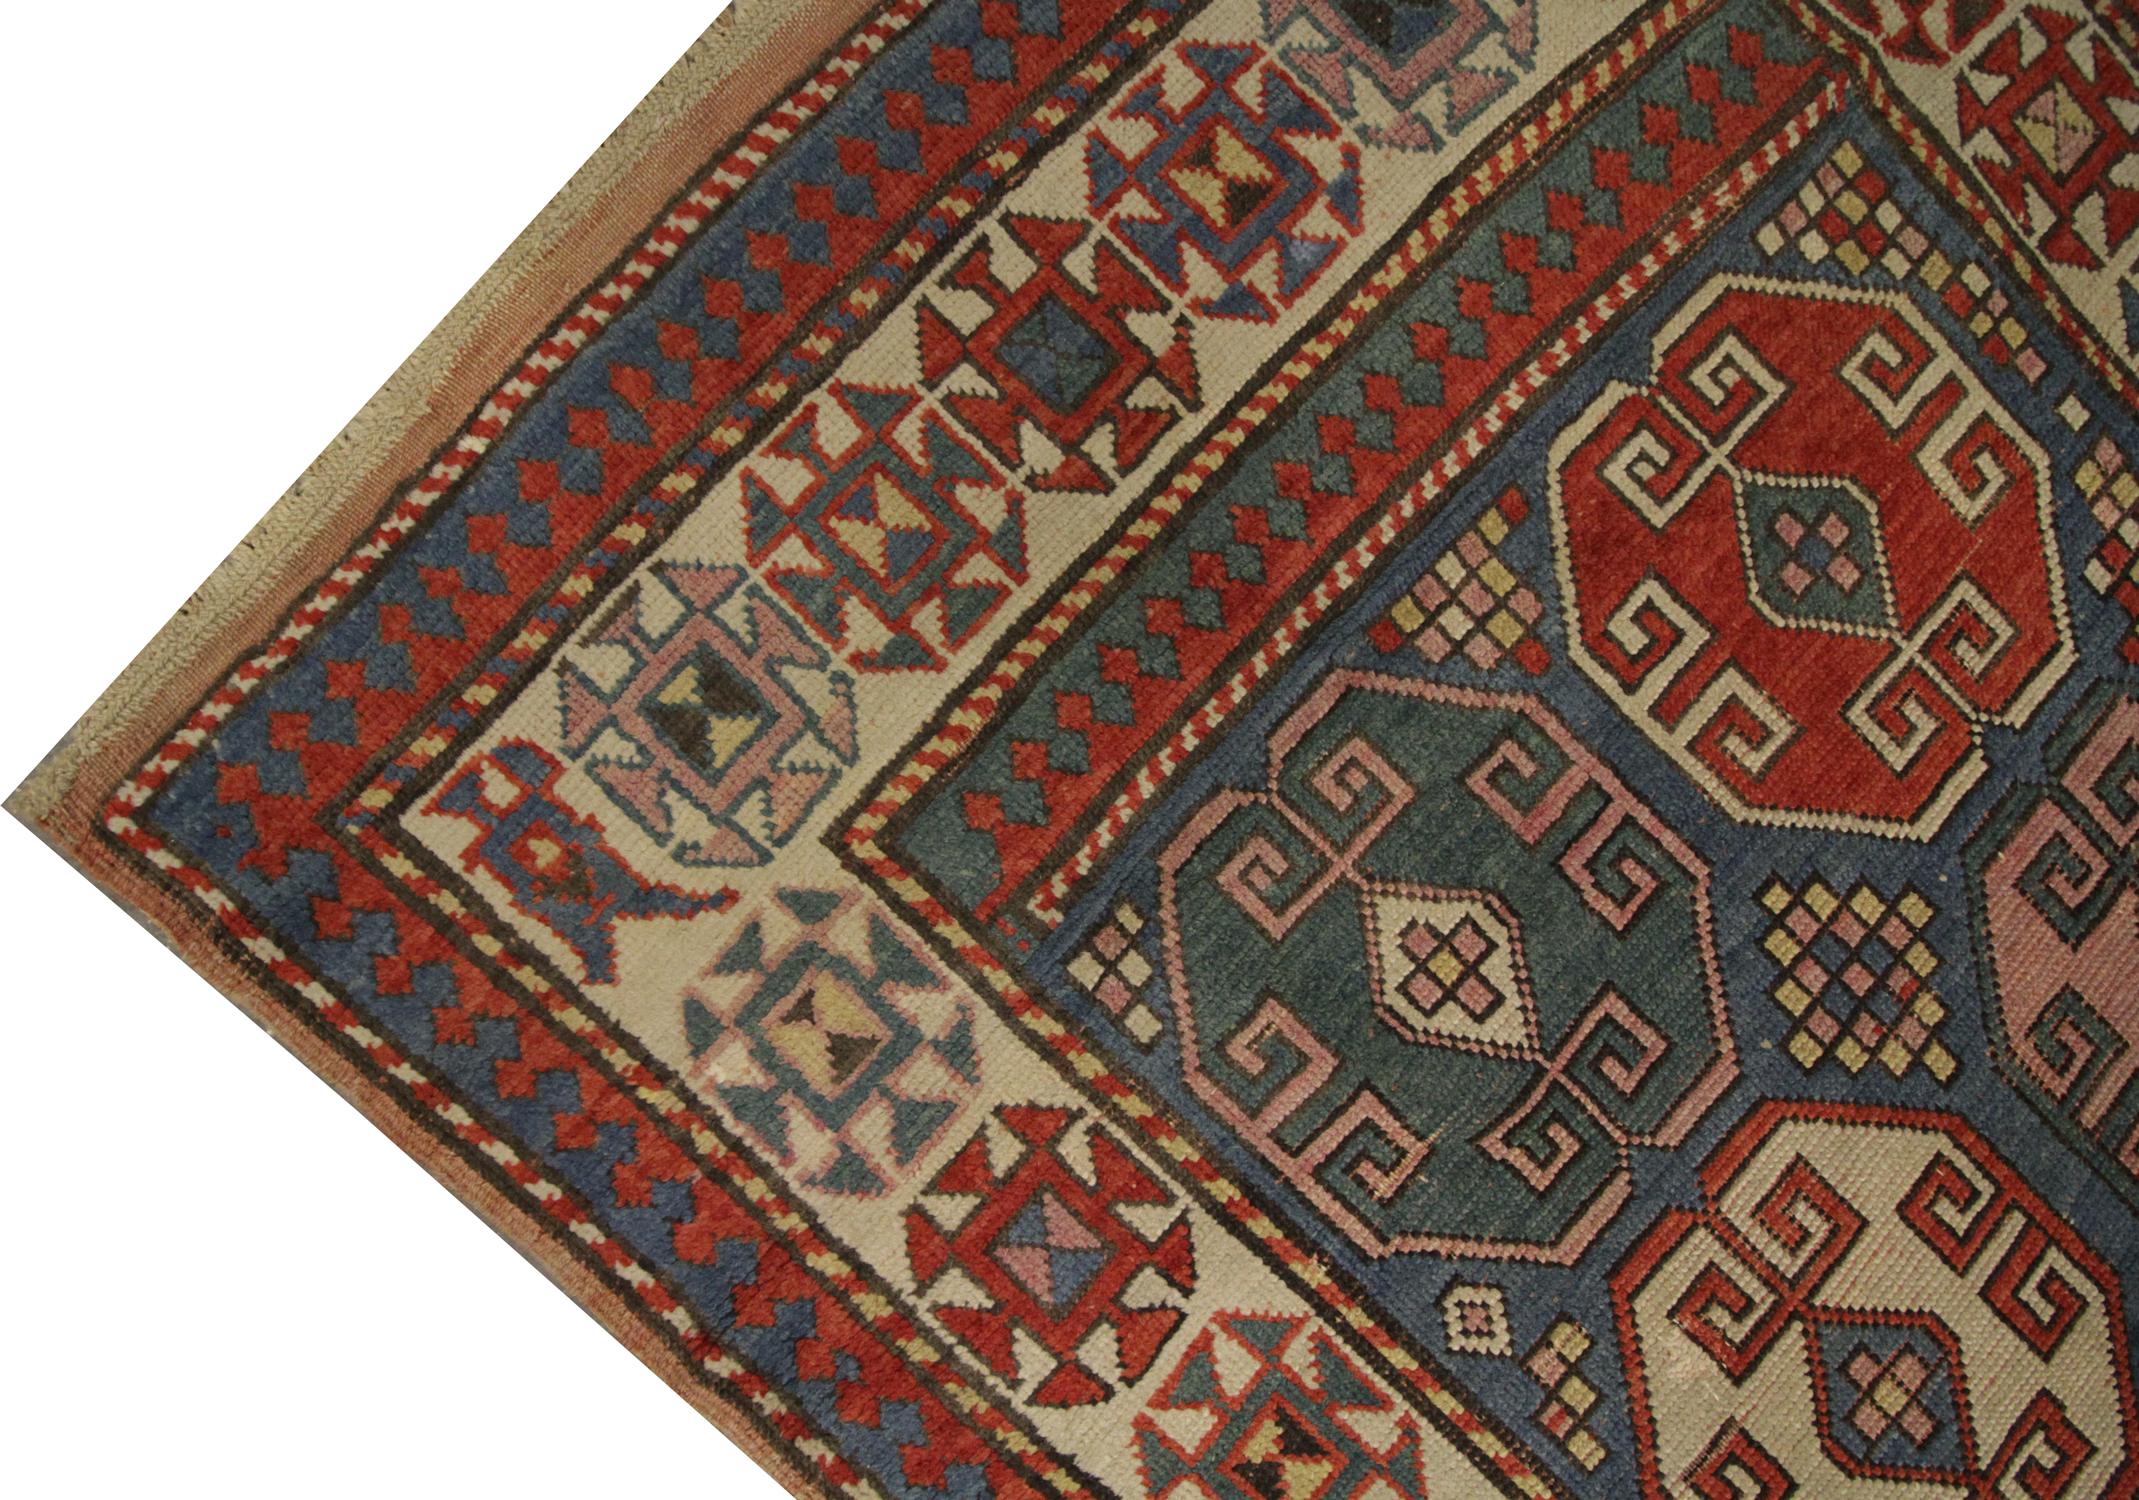 Azerbaijani Caucasian Antique Handmade Carpet Red and Blue Wool Entrance Rug Oriental For Sale